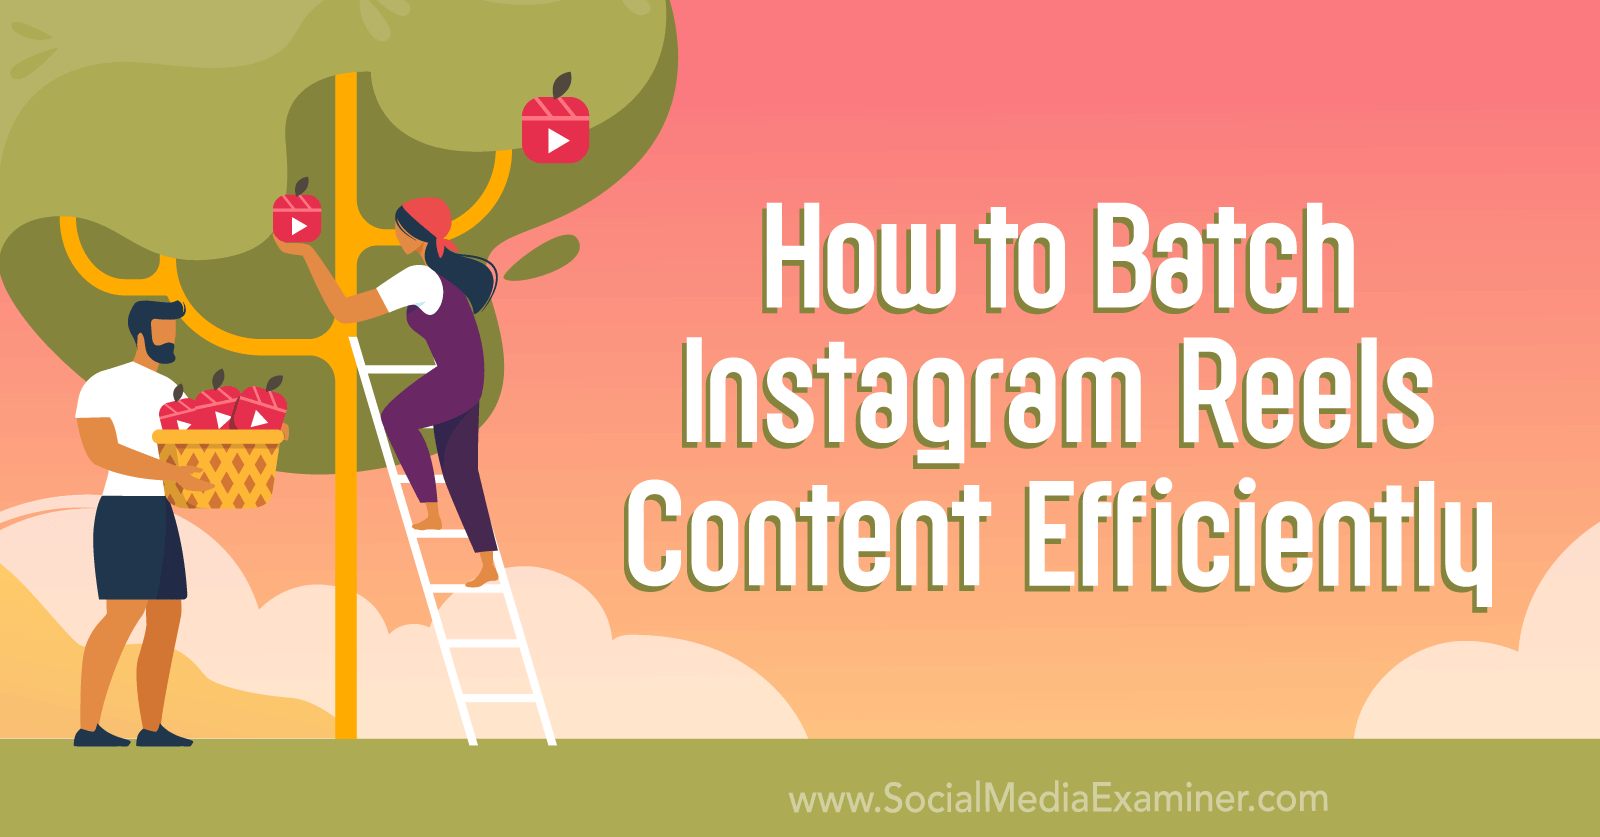 How to Batch Instagram Reels Content Efficiently by Social Media Examiner